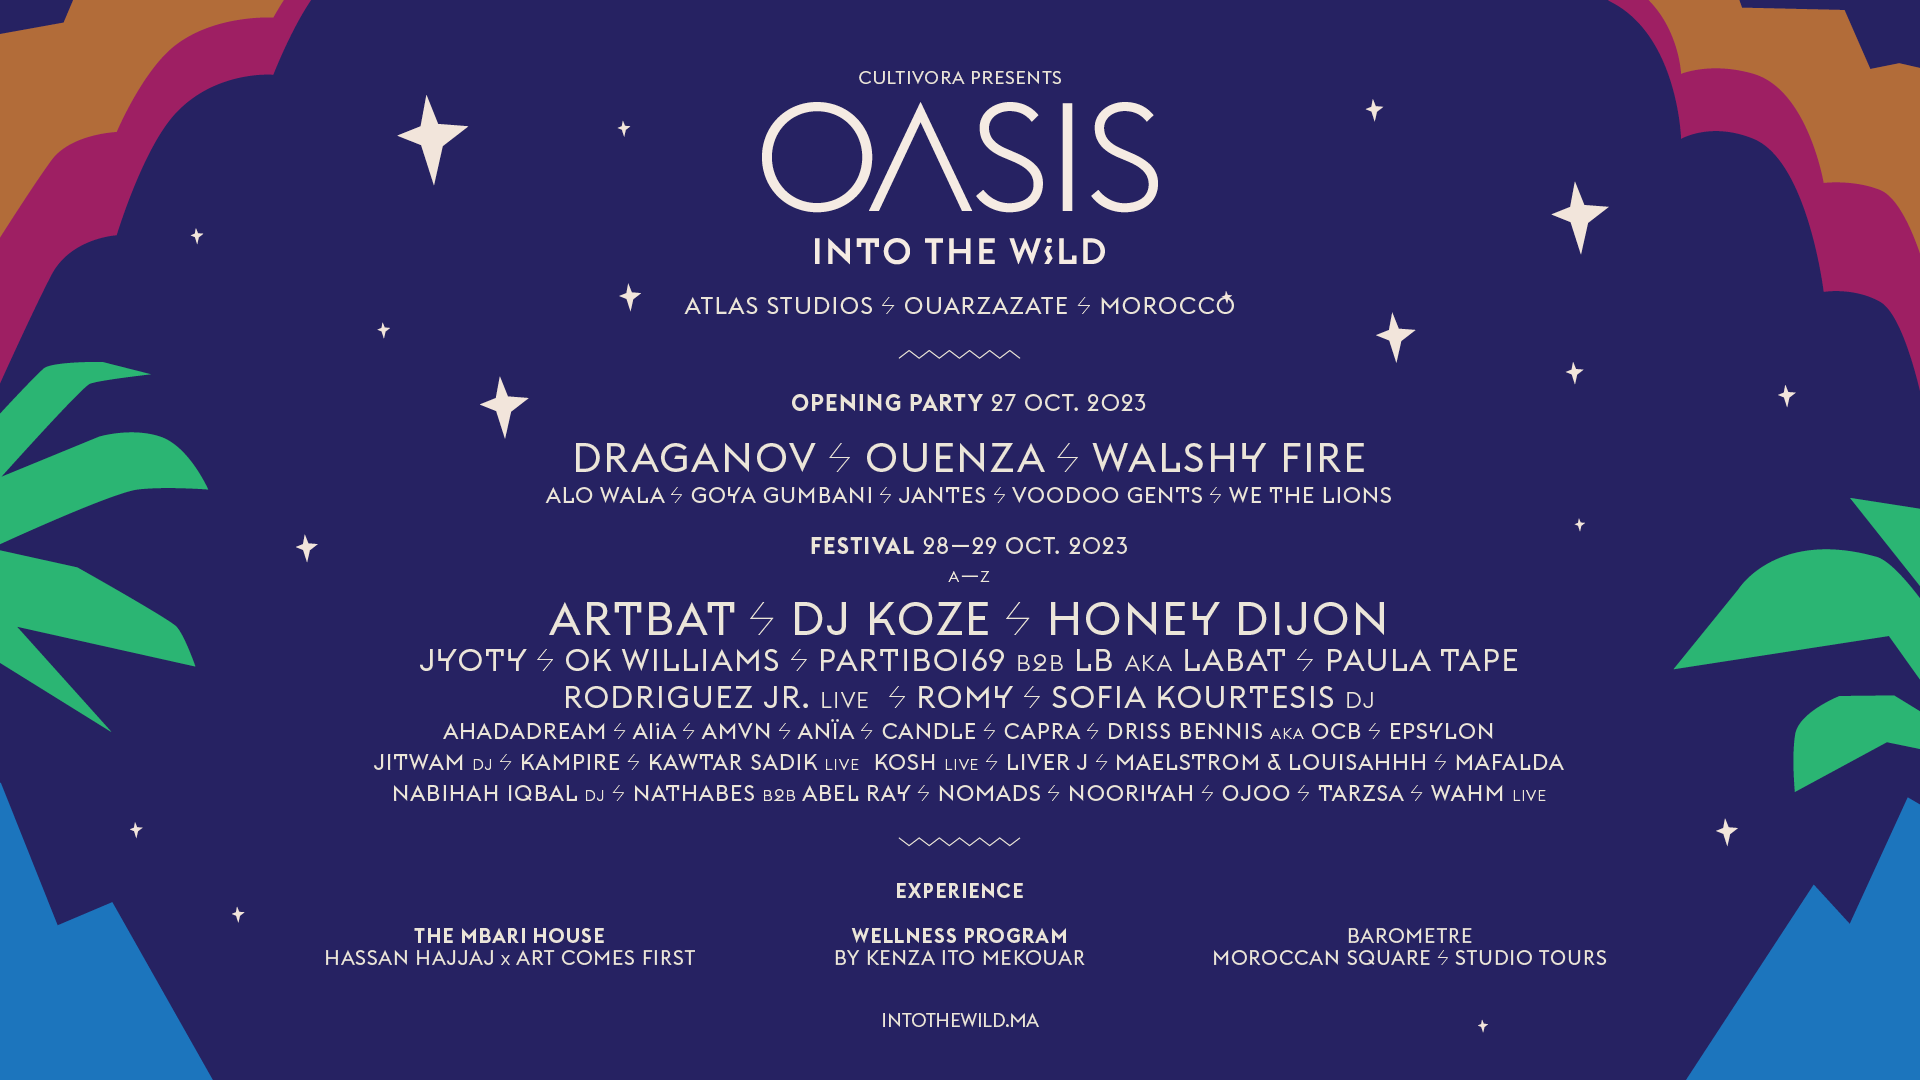 Oasis: Into the Wild 2023 - フライヤー表